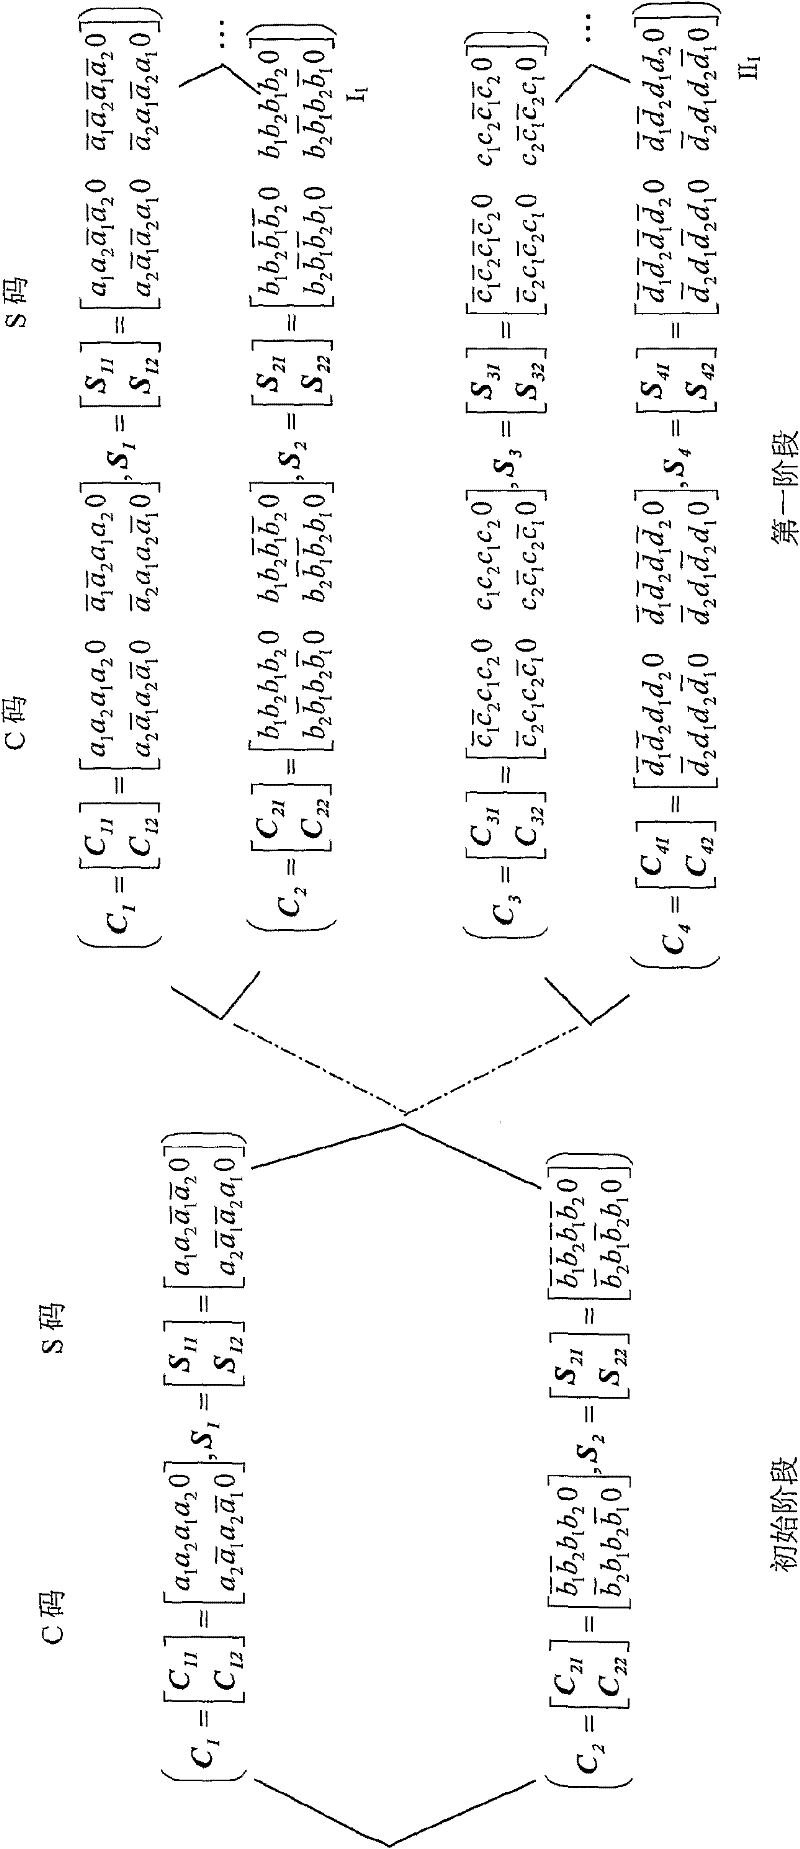 Multi-address encode method for packet time, space and frequency